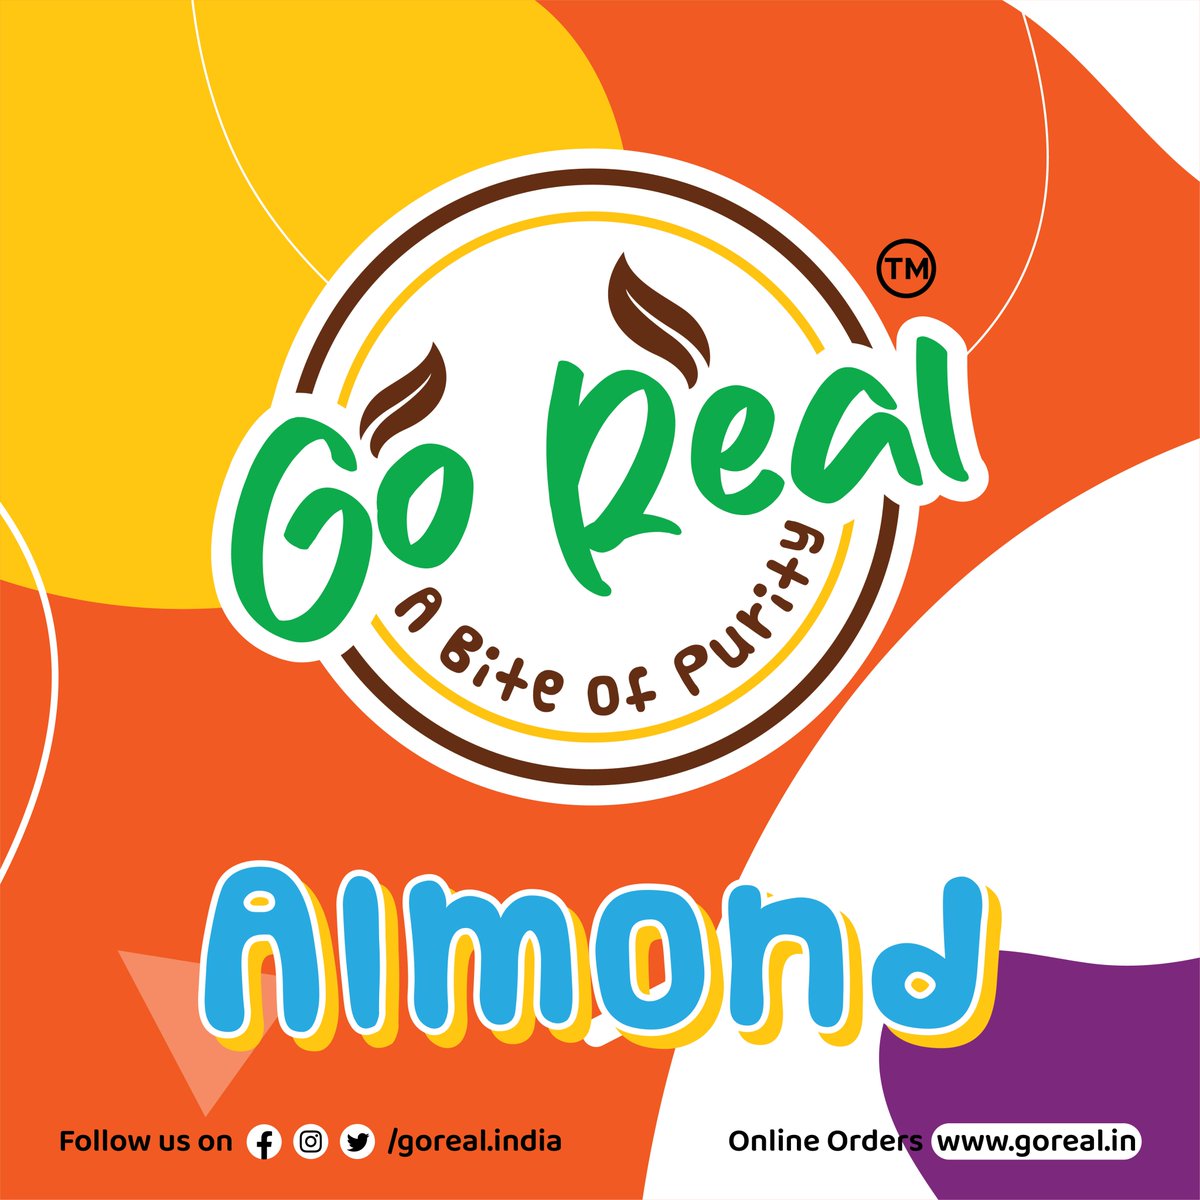 Indulge in the Irresistible! Immerse yourself in the exquisite flavors of our diverse almond selection. A truly nutty delight that will leave you craving for more!
.
.
#nutty #delights #satisfying #exquisite #almond #nutsfornuts #cravings #tastesensation #goreal #biteofpurity